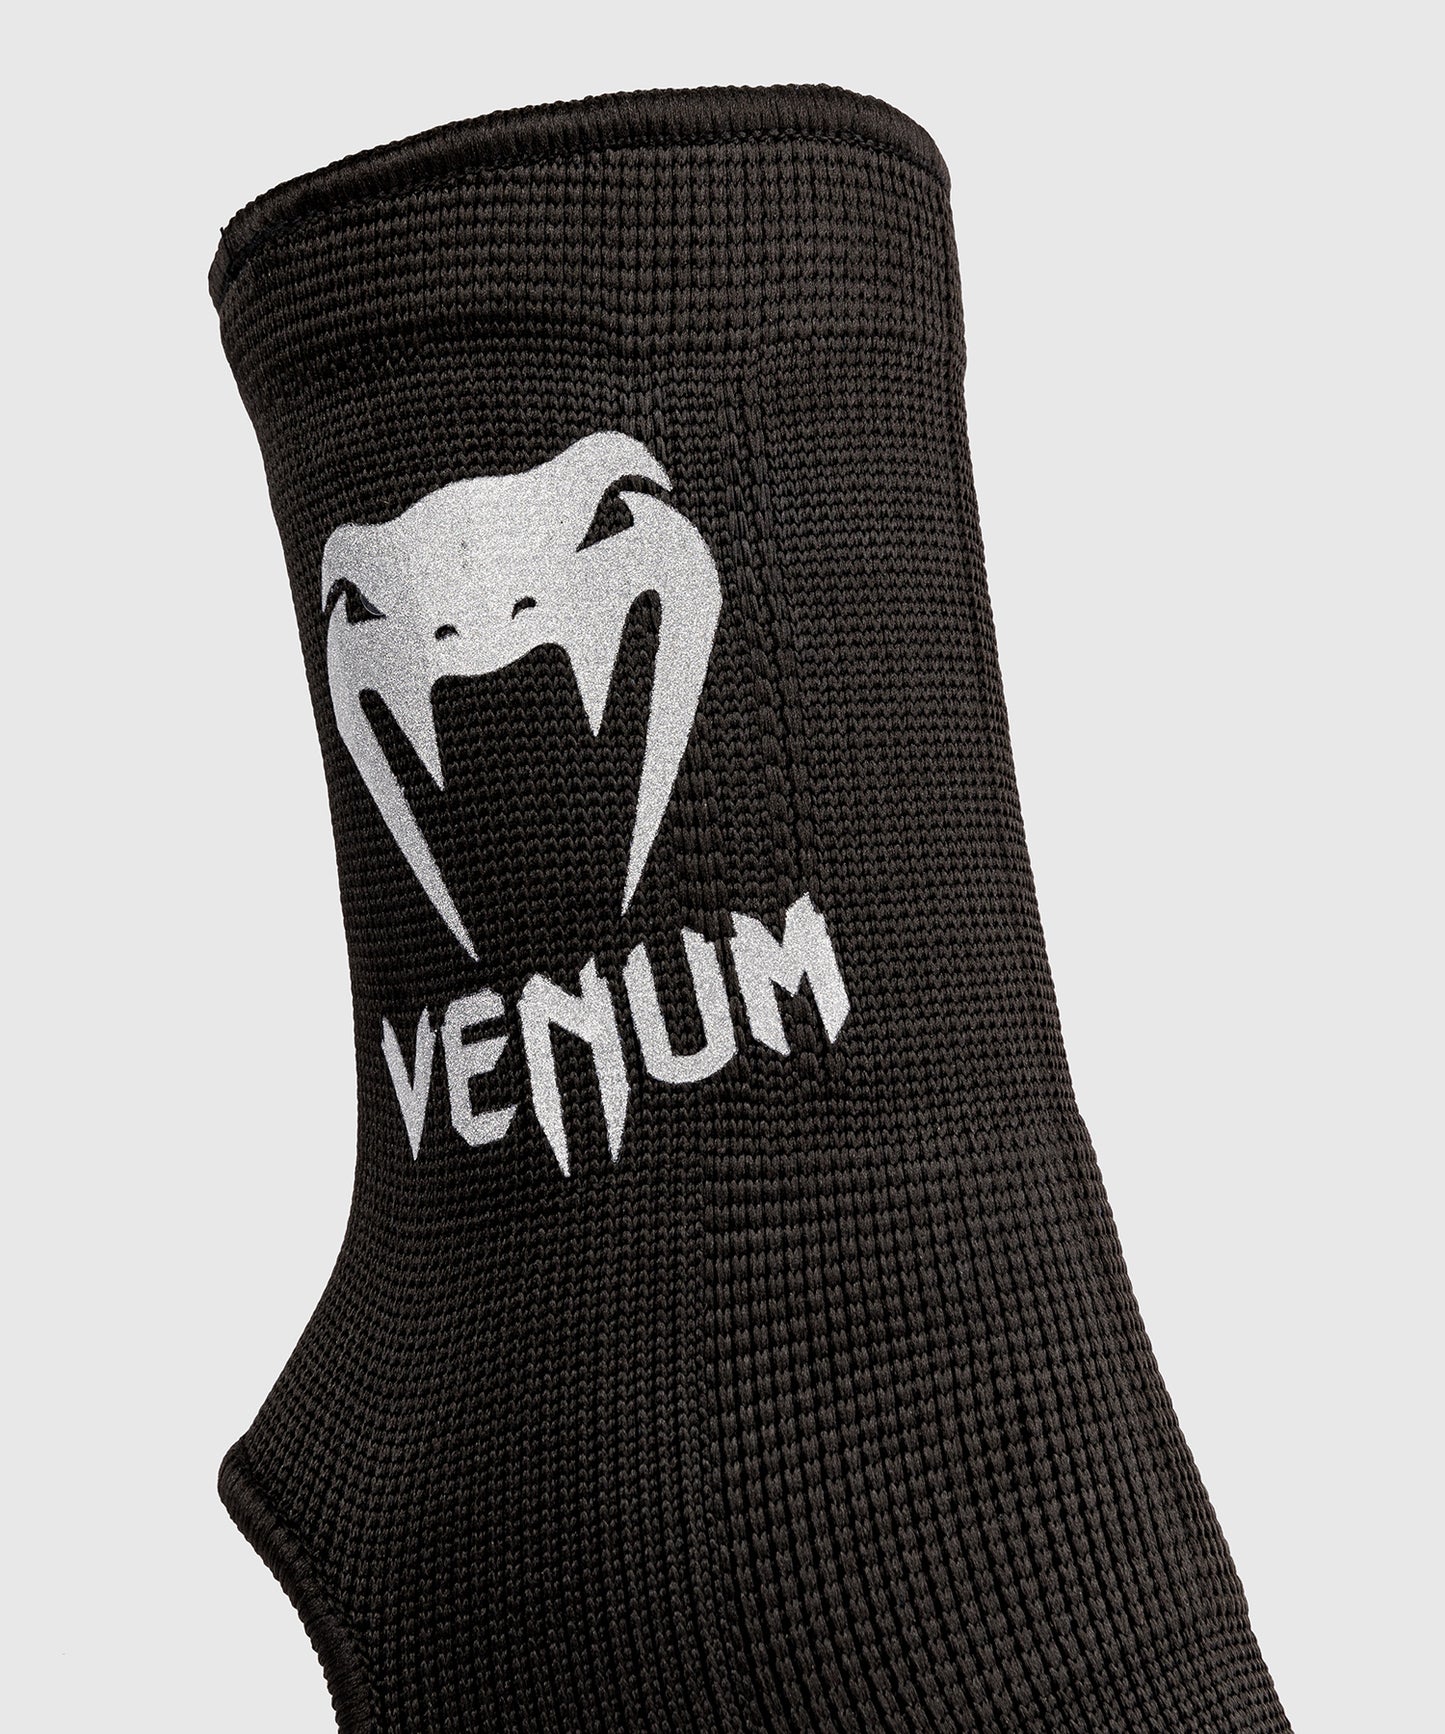 Venum Kontact Ankle Support Guards - Black/Silver